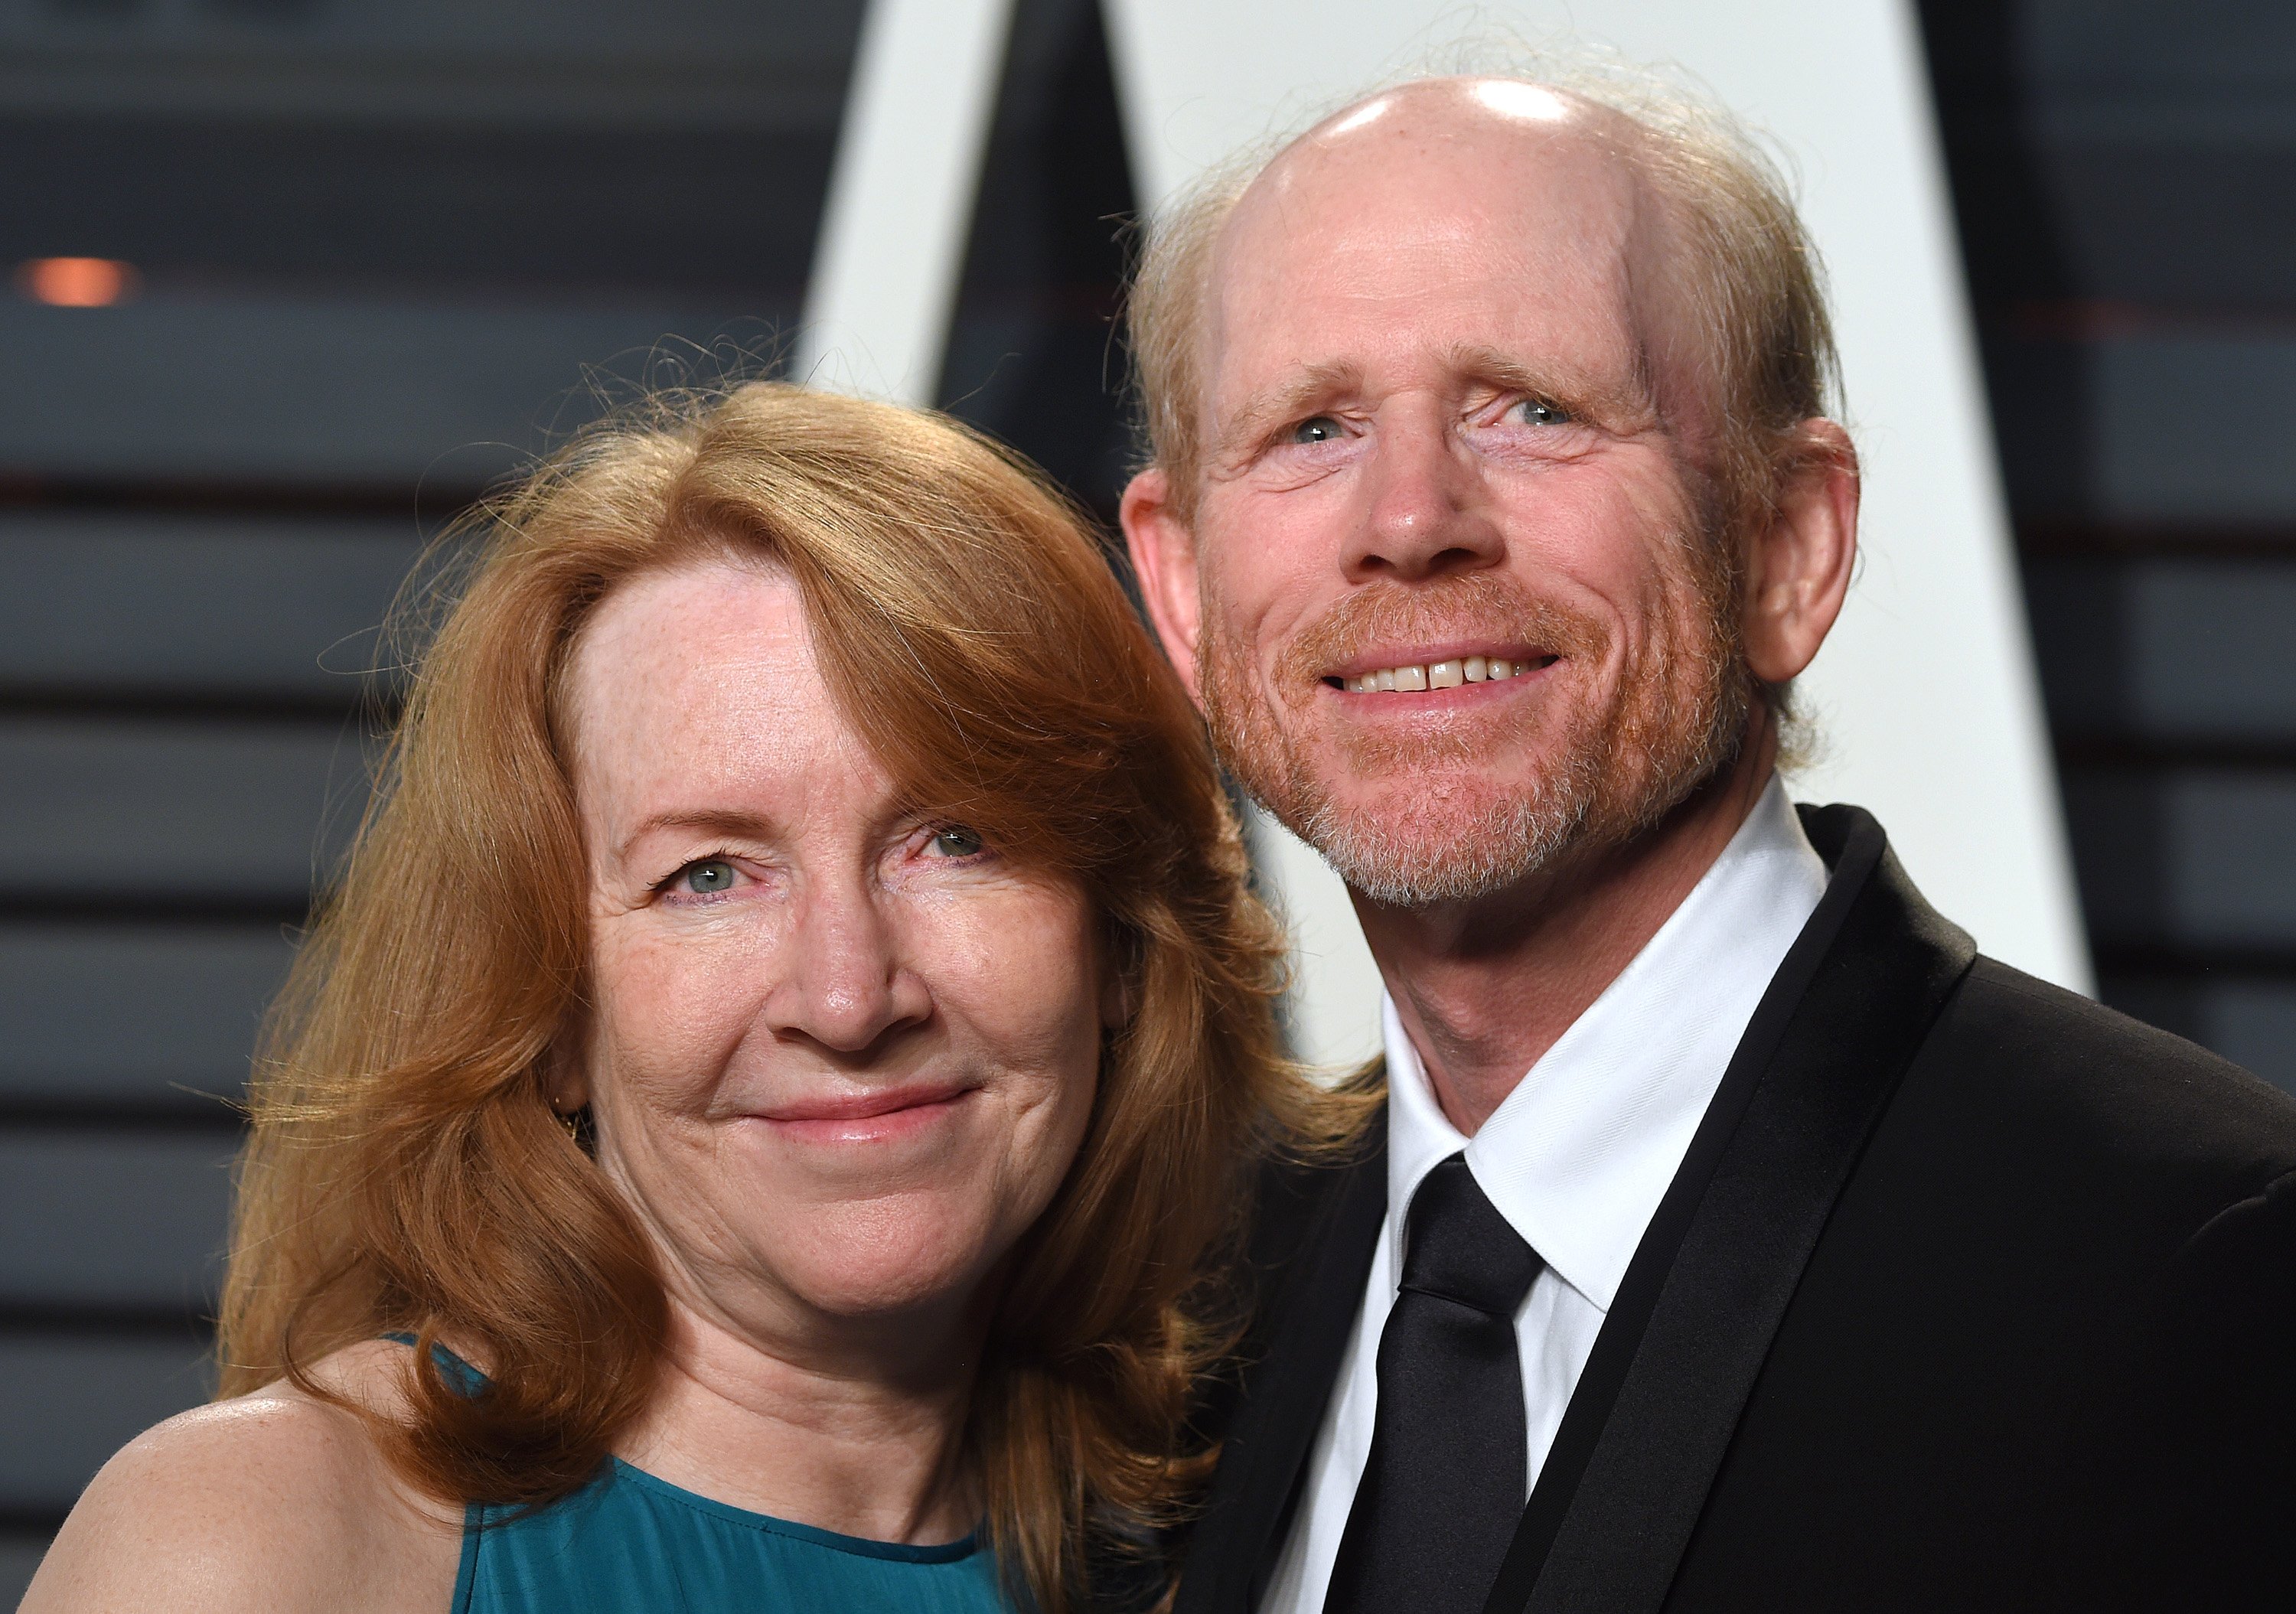 Ron Howard and Cheryl at the 2017 Vanity Fair Oscar Party | Source: Getty Images